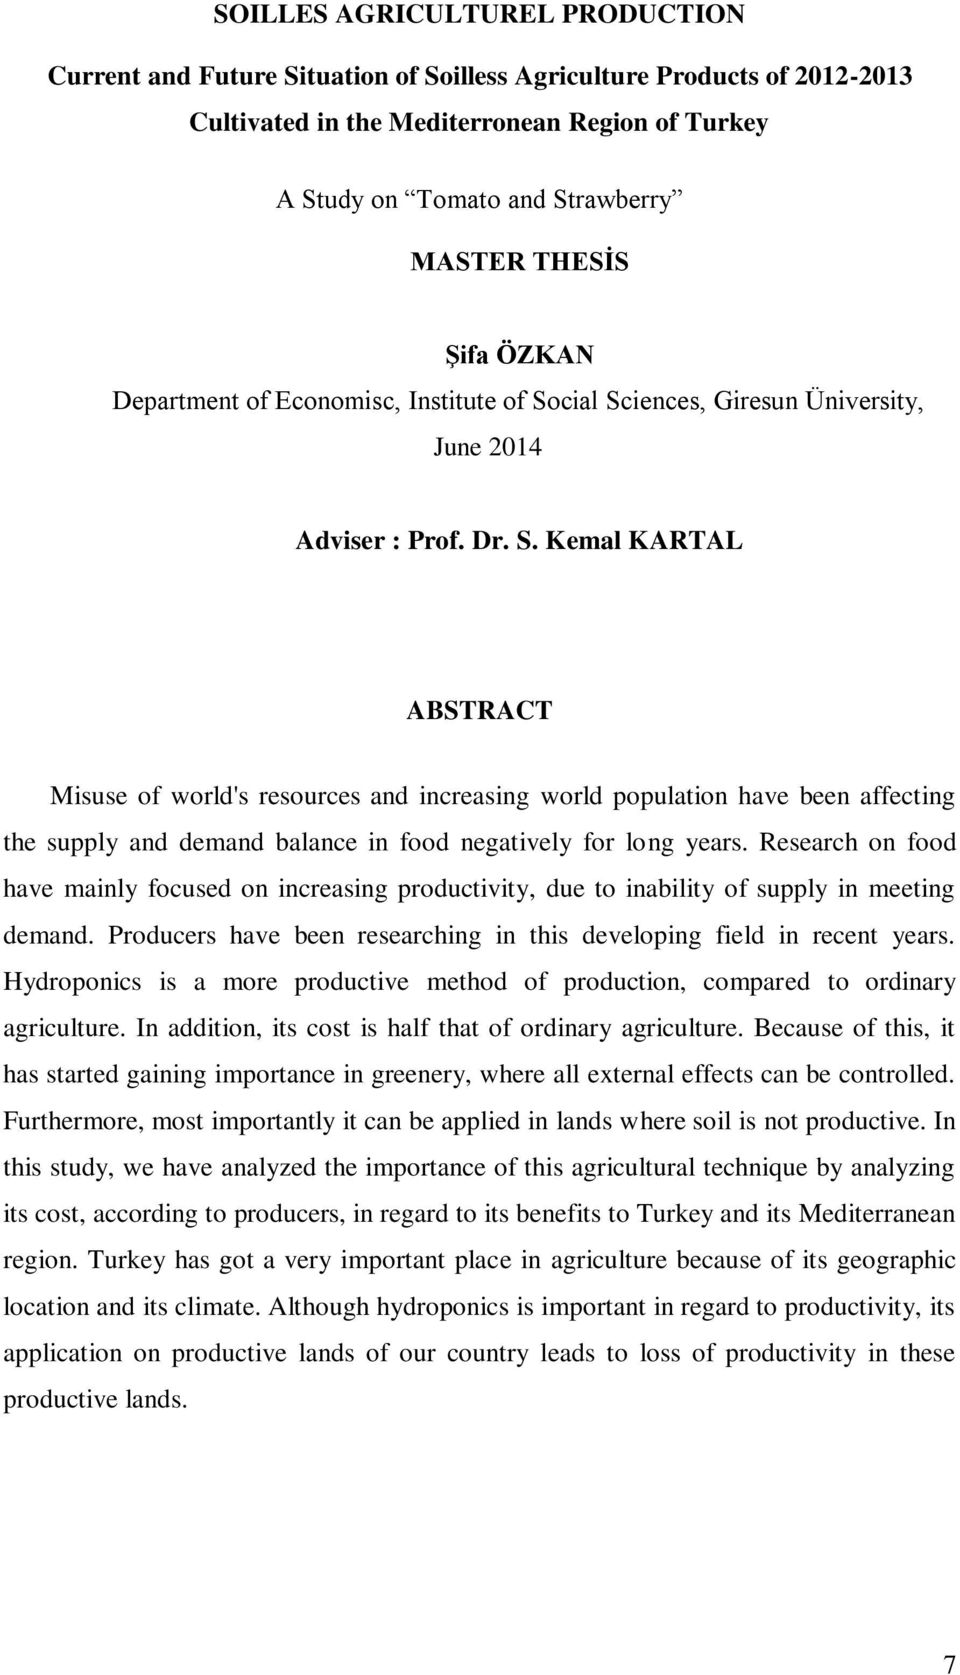 cial Sciences, Giresun Üniversity, June 2014 Adviser : Prof. Dr. S. Kemal KARTAL ABSTRACT Misuse of world's resources and increasing world population have been affecting the supply and demand balance in food negatively for long years.